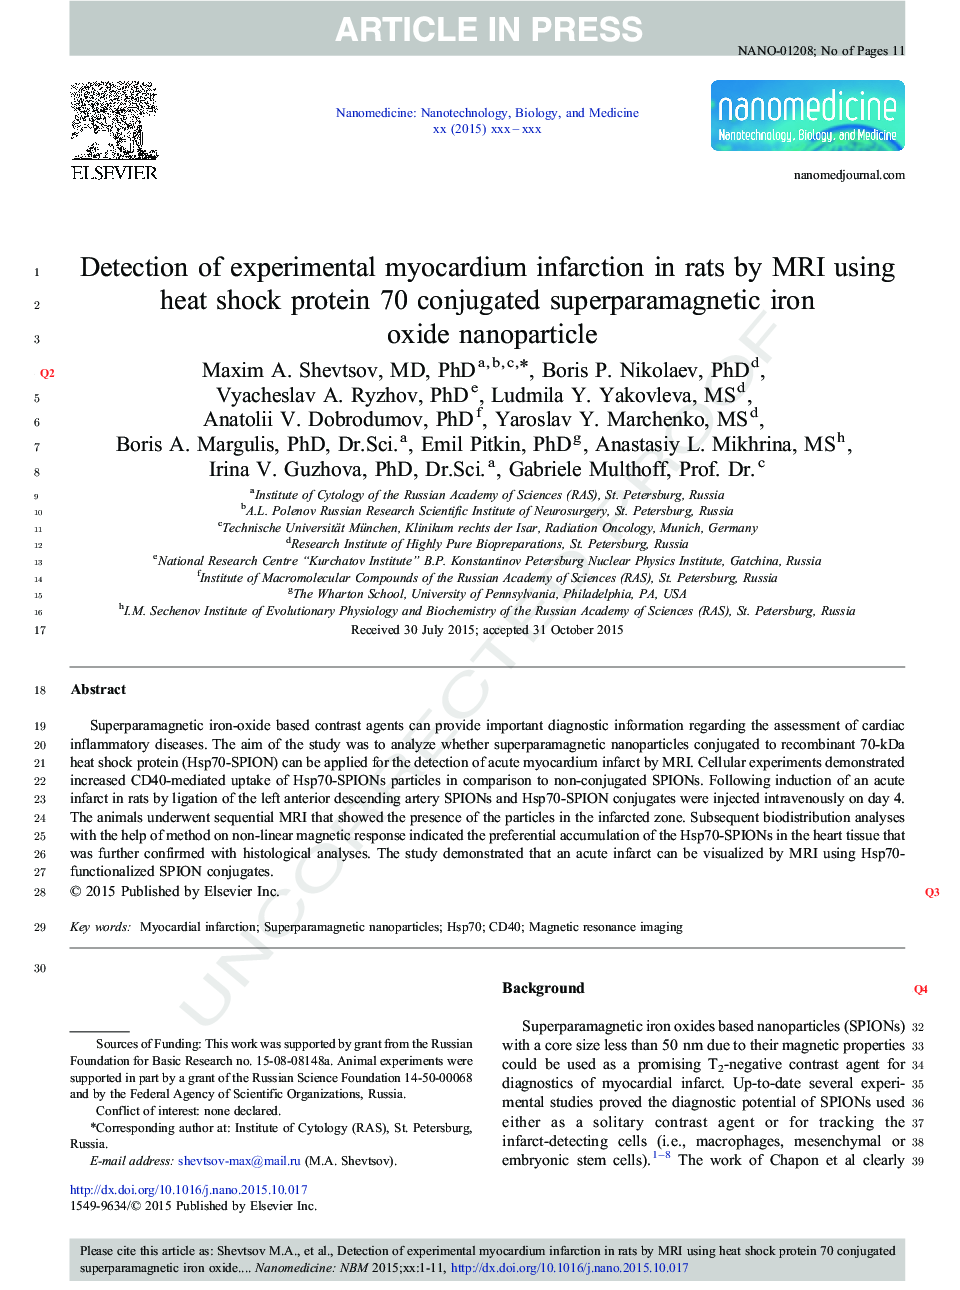 Detection of experimental myocardium infarction in rats by MRI using heat shock protein 70 conjugated superparamagnetic iron oxide nanoparticle